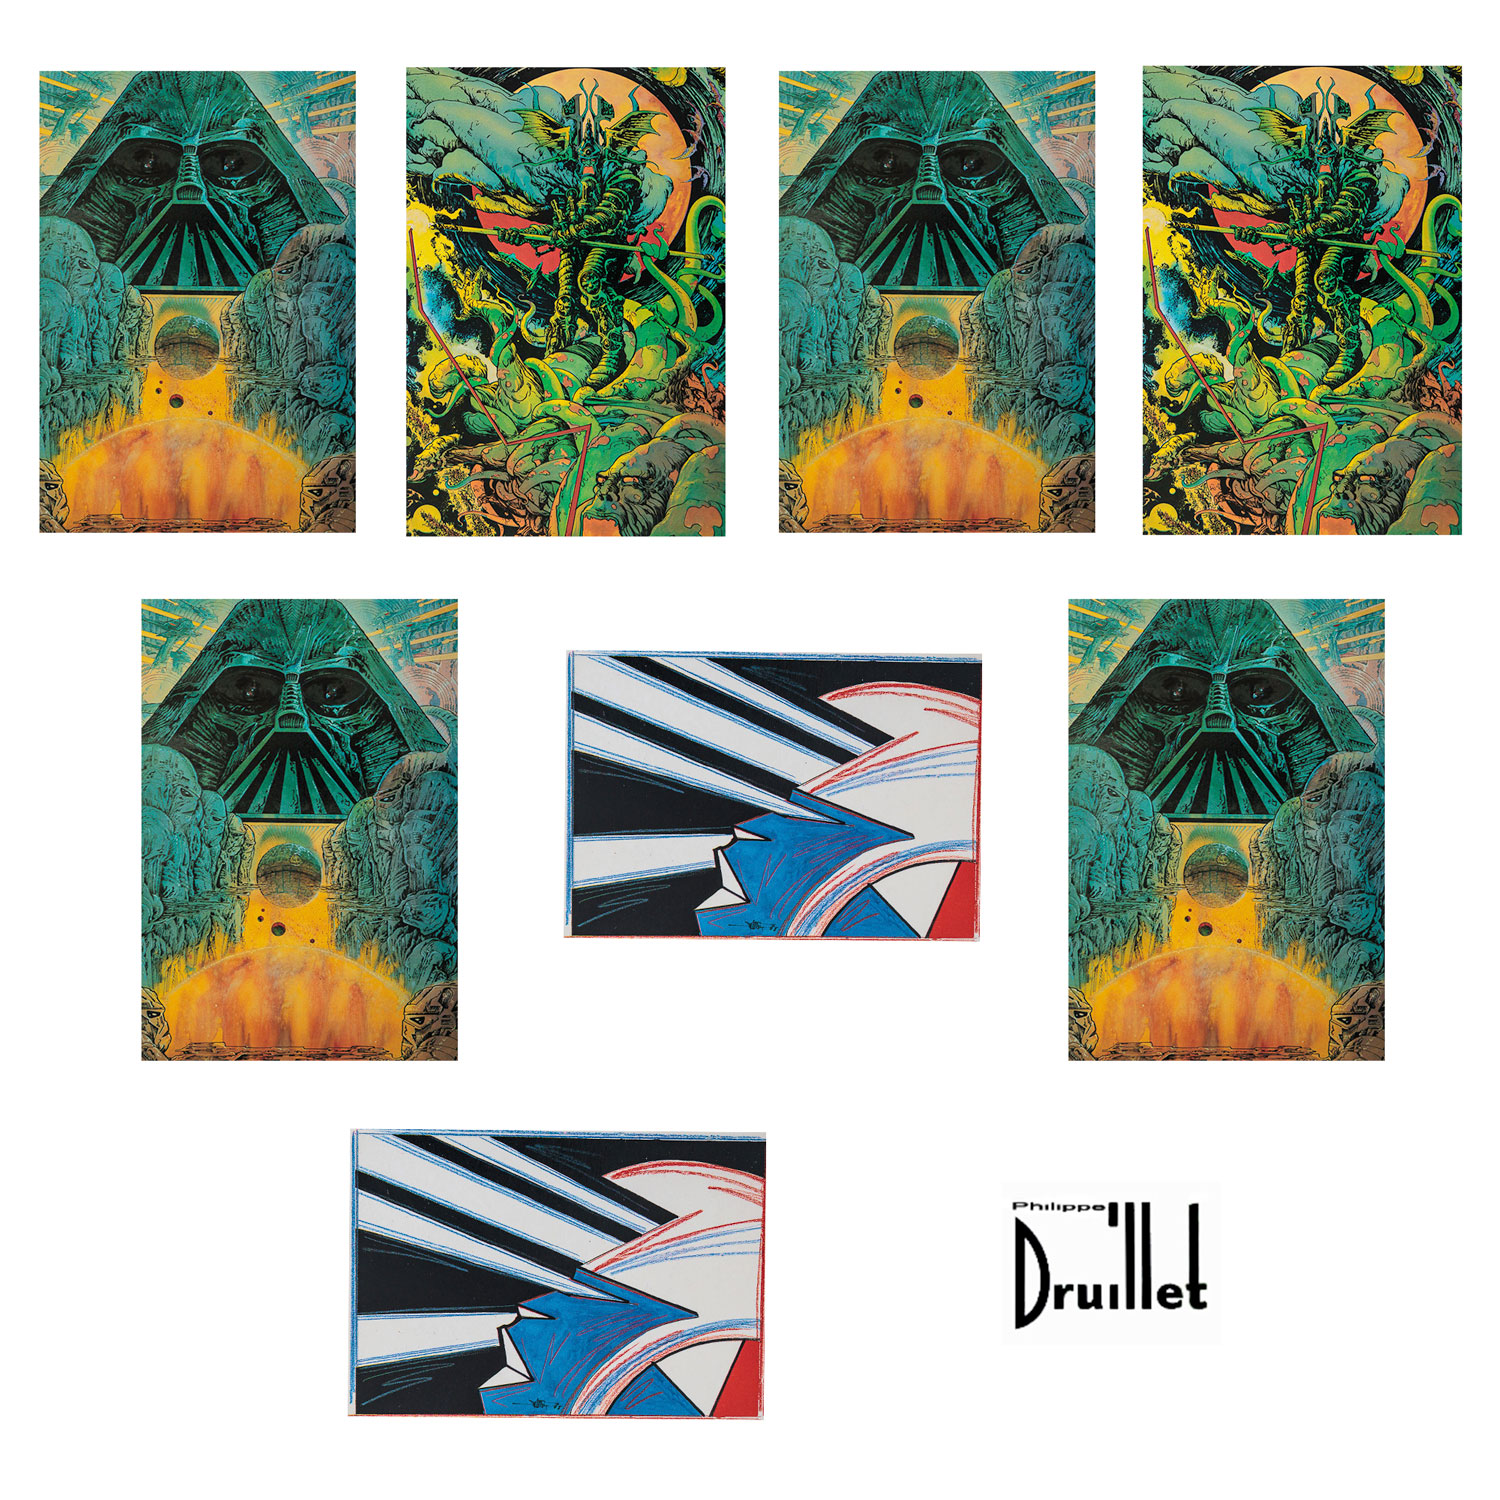 Cartes postales collector Philippe Druillet